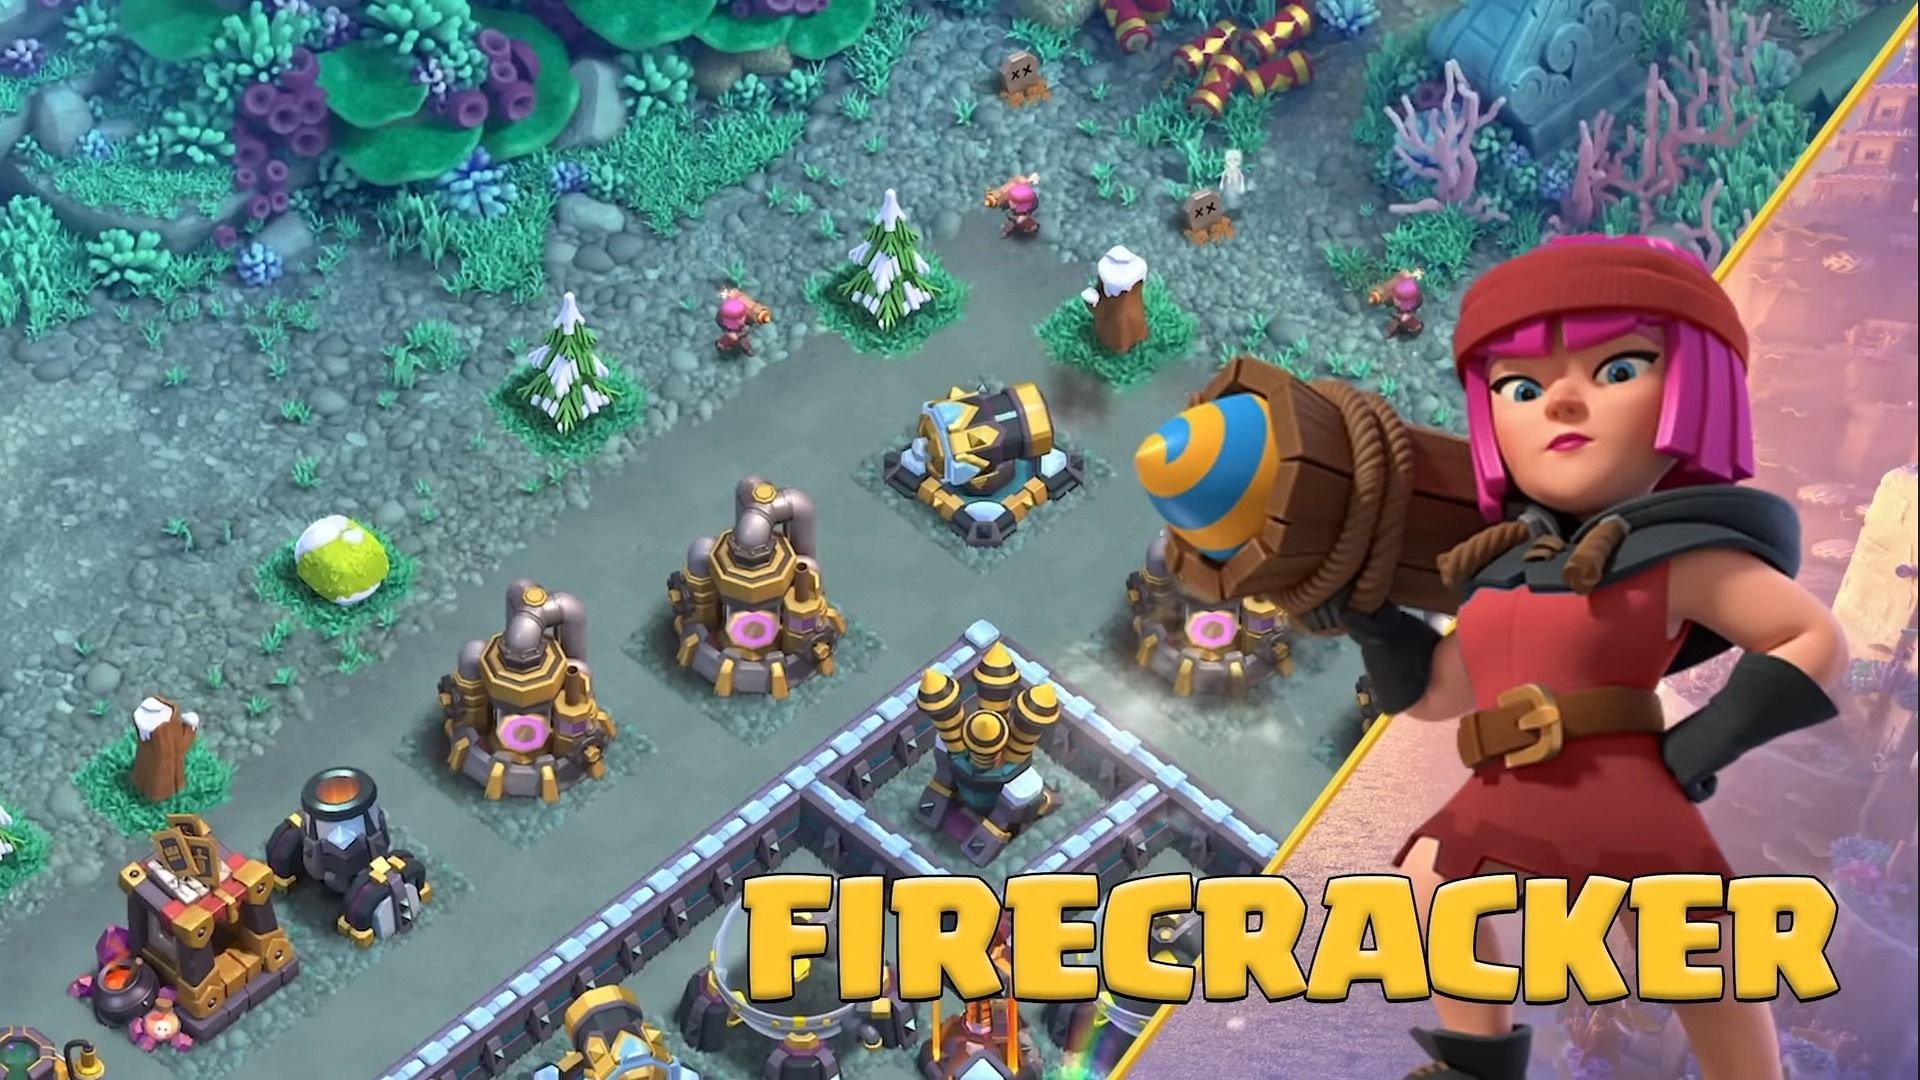 Best use of Firecracker (Image via Supercell)